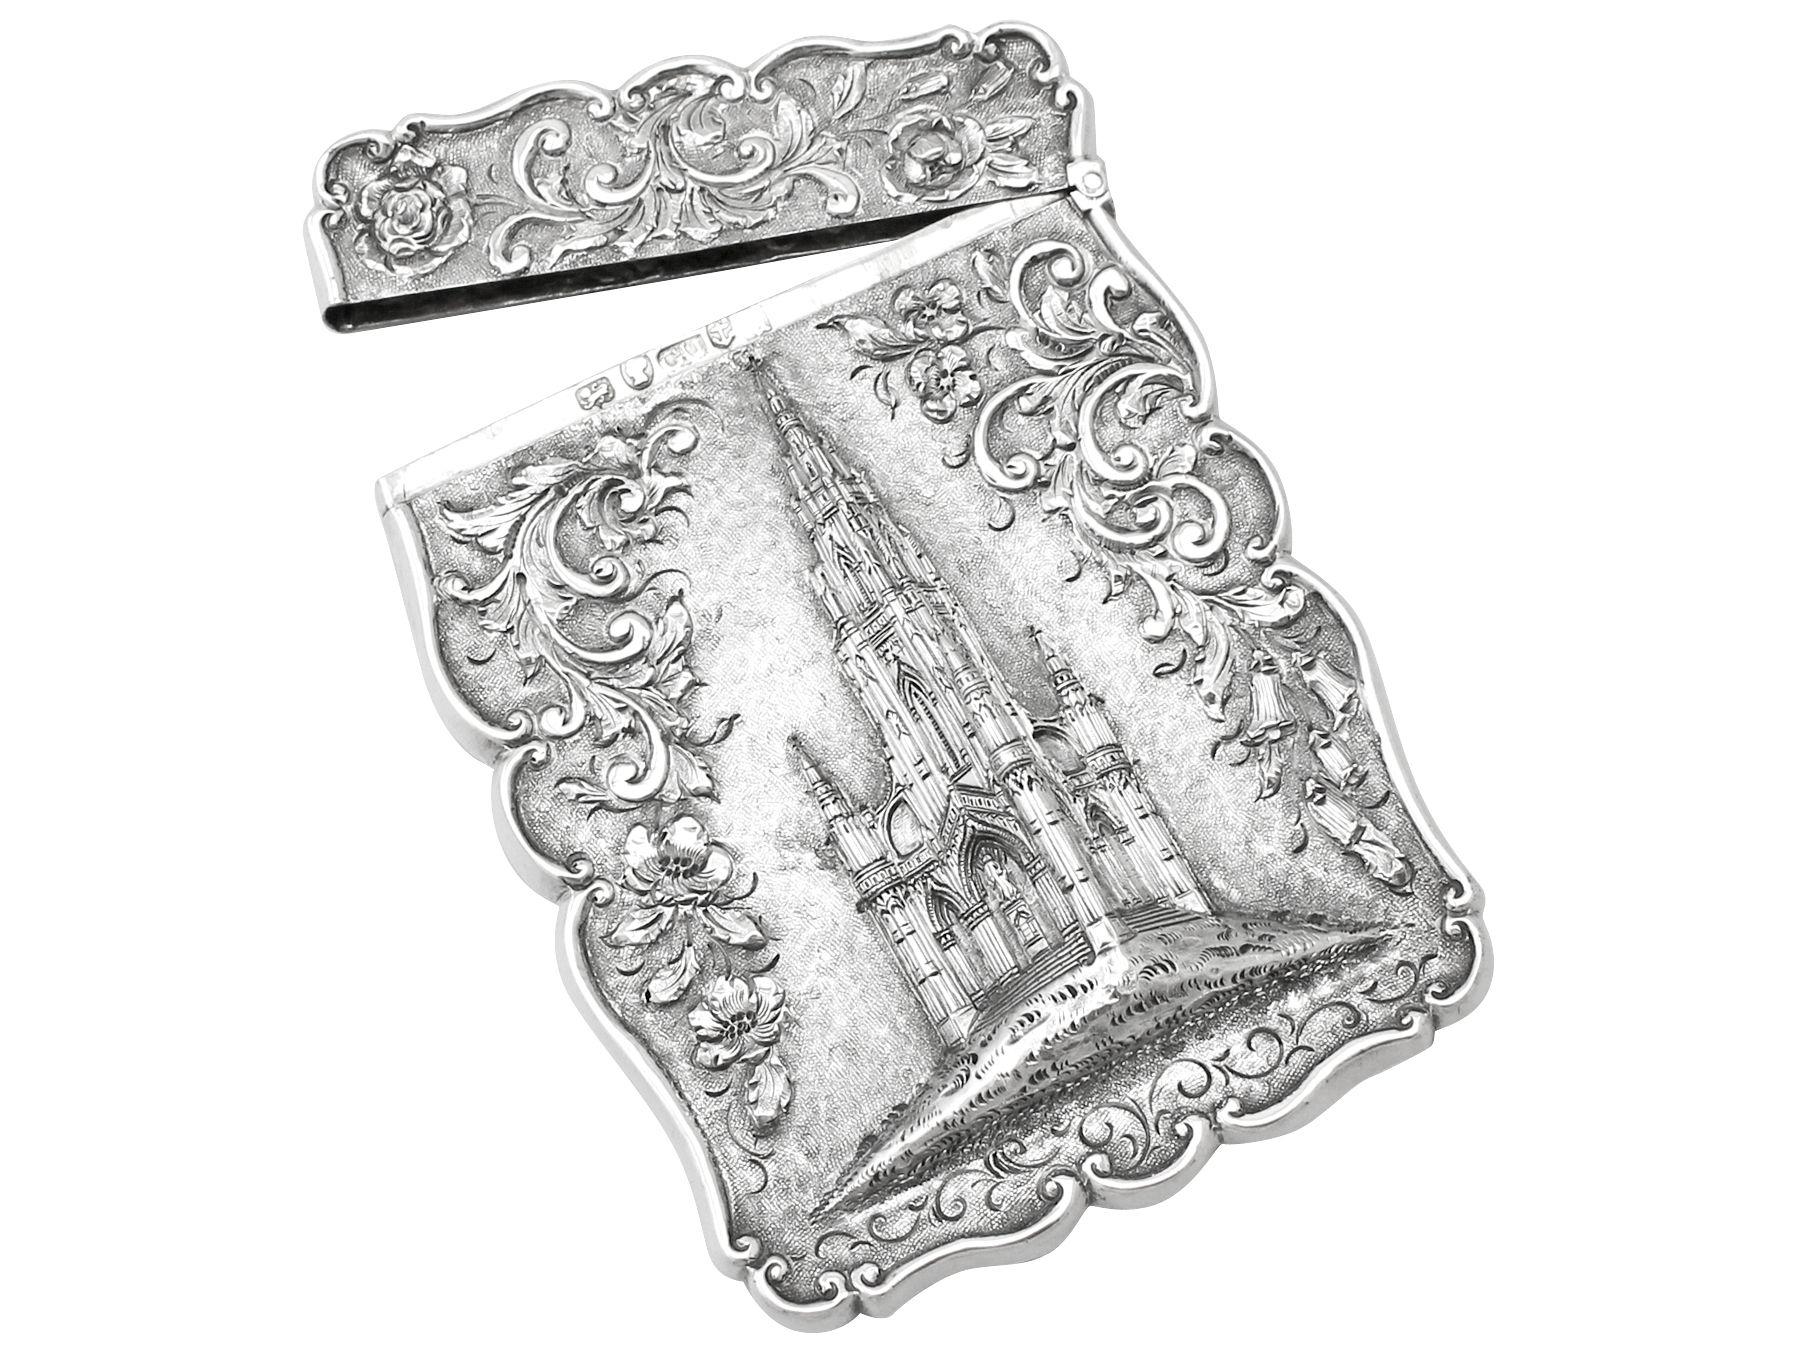 George Unite Antique Victorian Sterling Silver Card Case For Sale 1